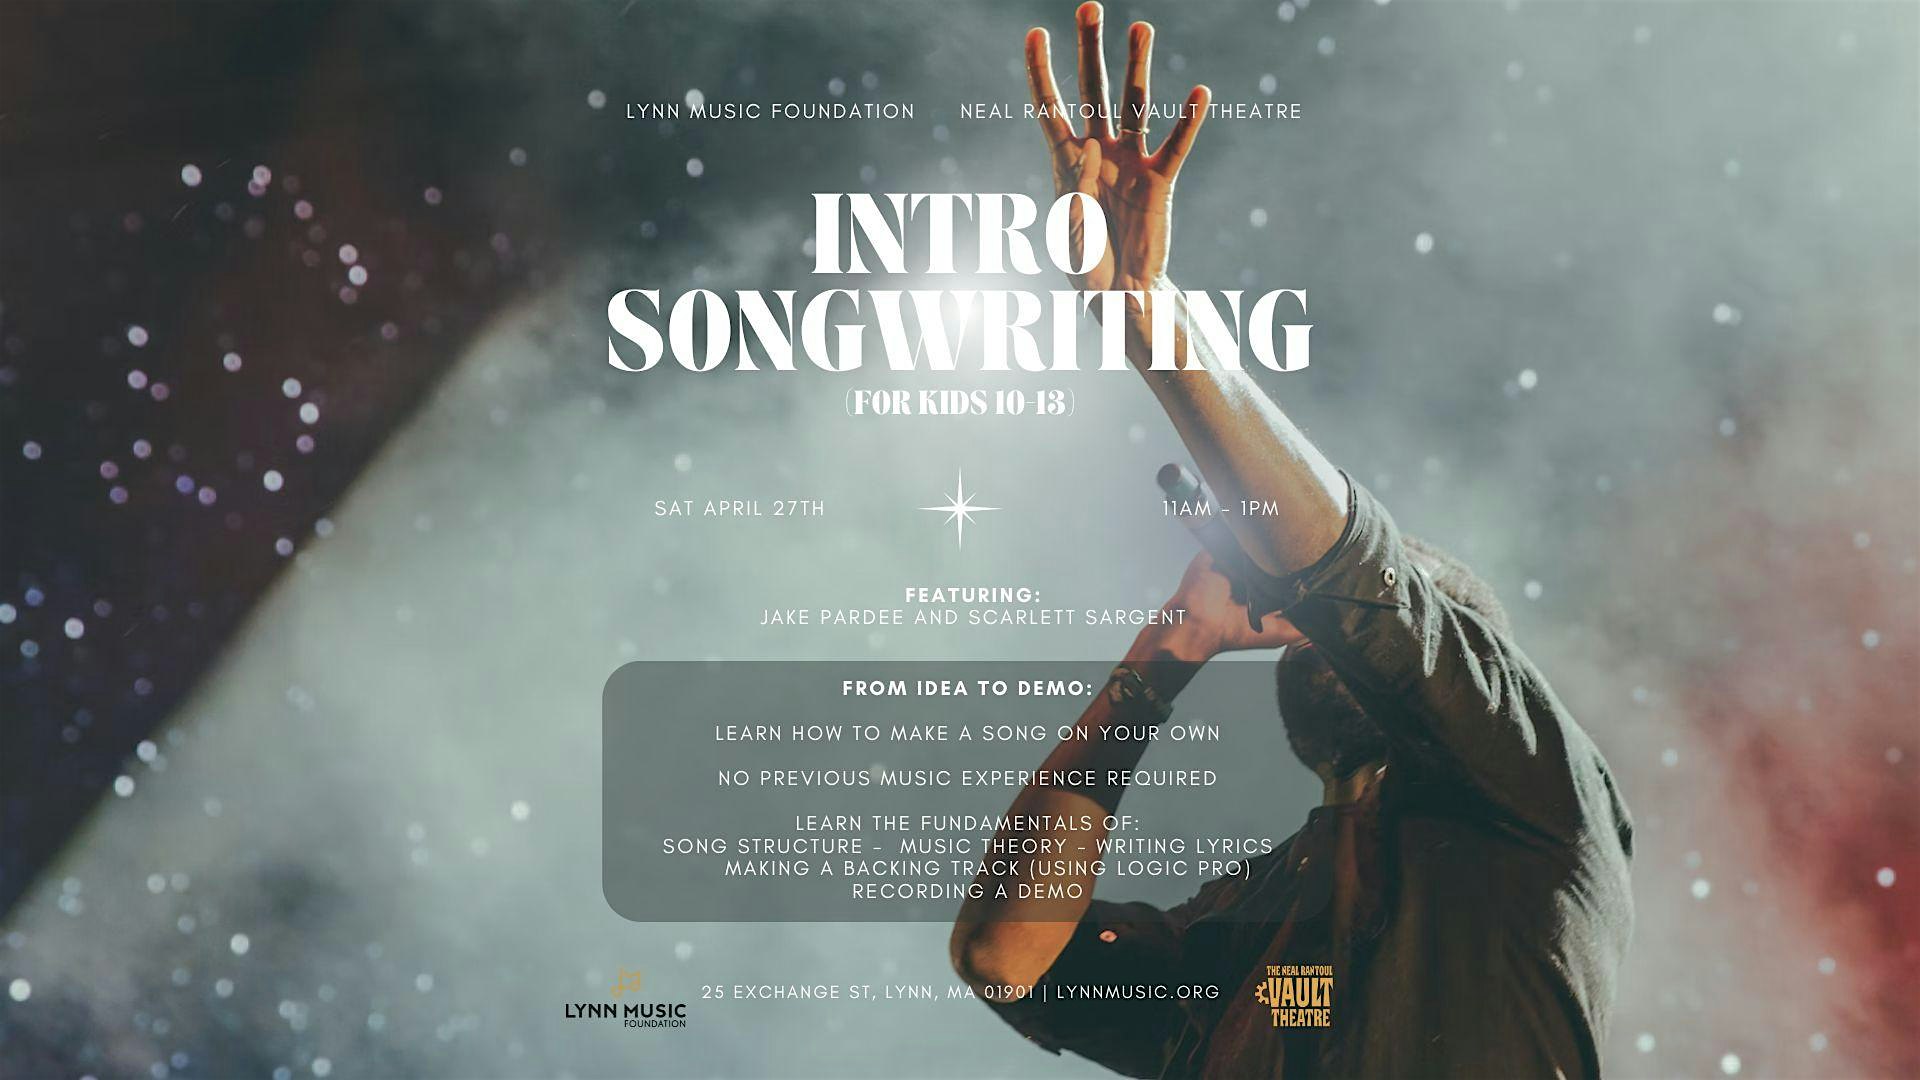 Experience the joy of songwriting at our fun and educational workshop designed for kids aged 10 and up! Join us on Saturday, April 27th. Get inspired to create your own music with industry professionals Jake Roade and Scarlet Sargent. Spark your creativity and transform your thoughts into lyrics in our Intro to Songwriting Workshop!